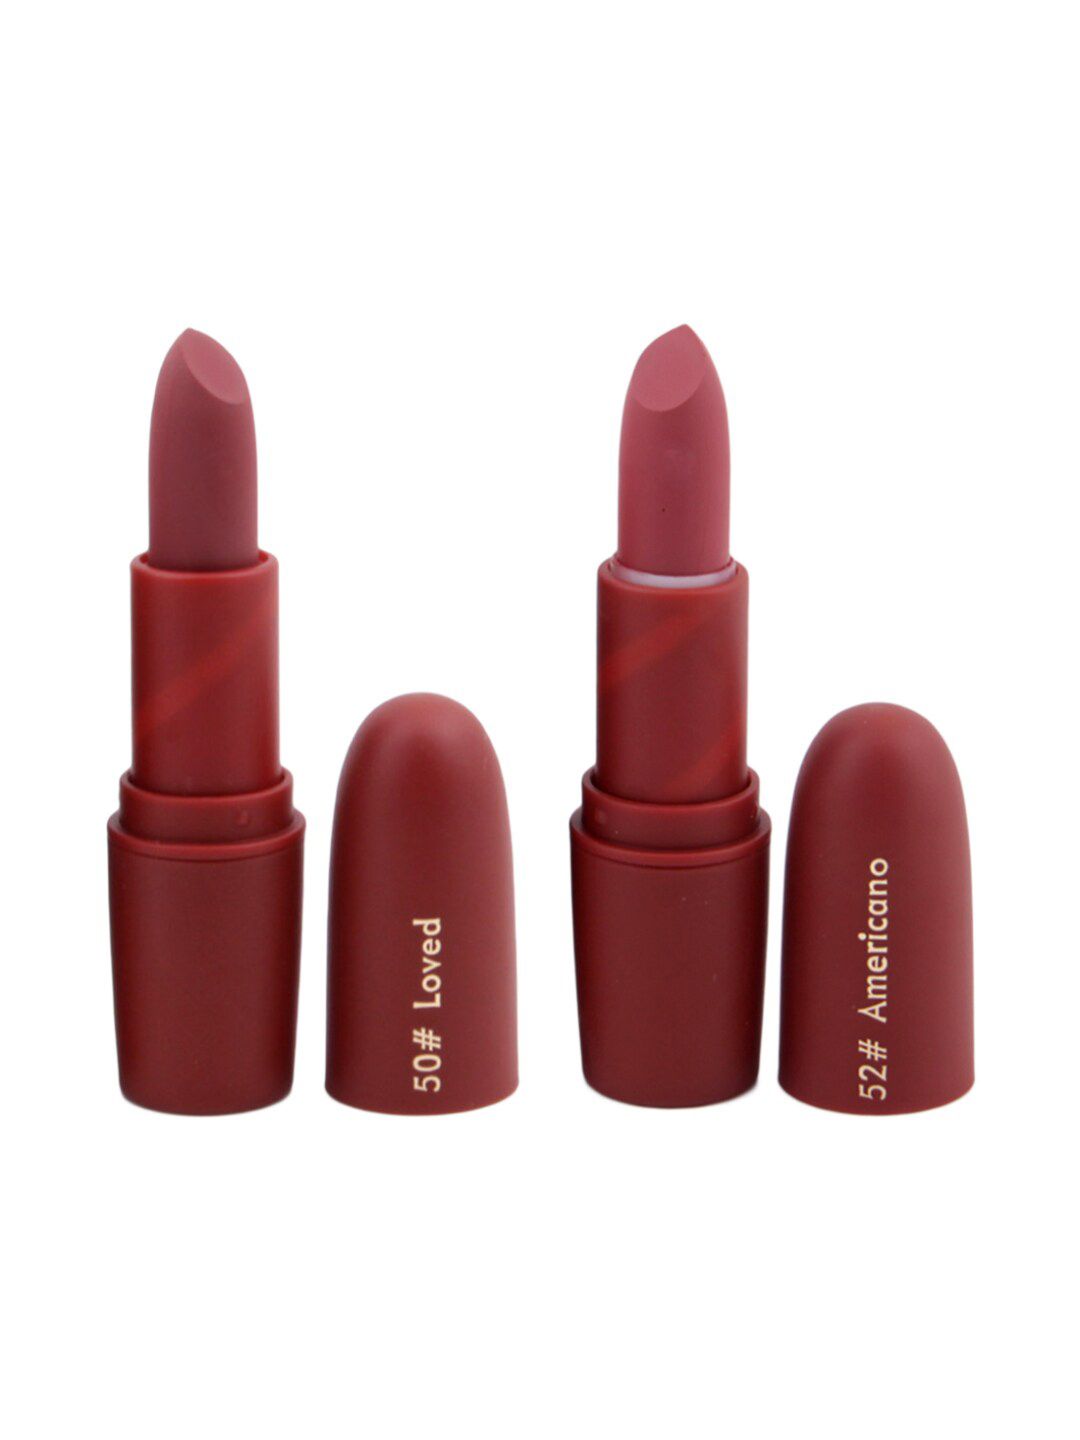 MISS ROSE Professional Make-Up Set of 2 Matte Creamy Lipsticks - Loved 50 & Americano 52 Price in India